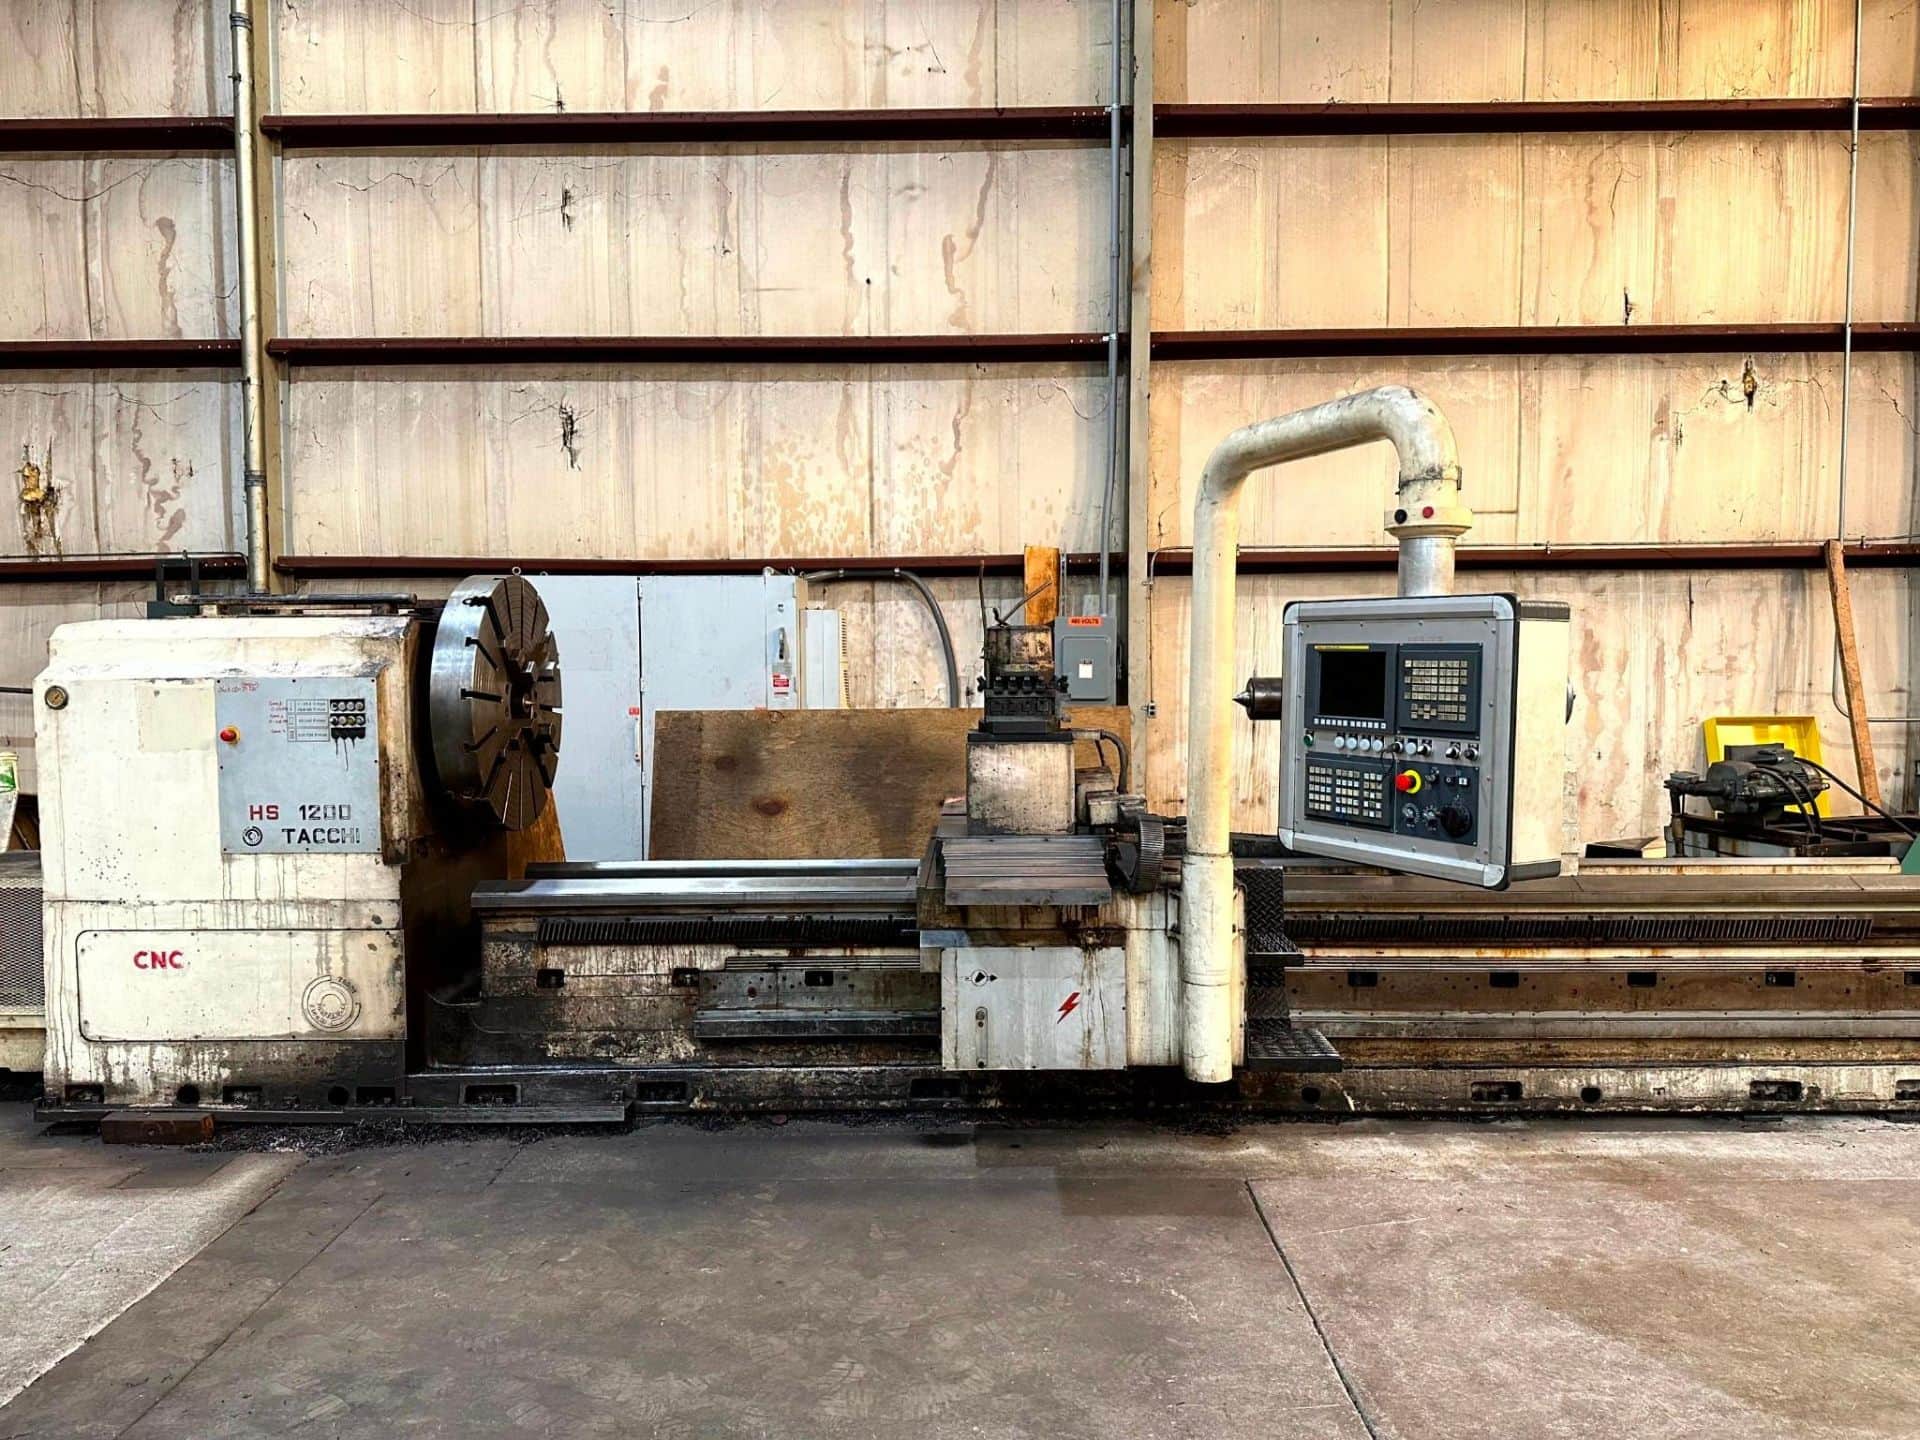 tacchi hs 1200 53 inches x 157 inches 236 inches cnc sliding gap lathe 2013